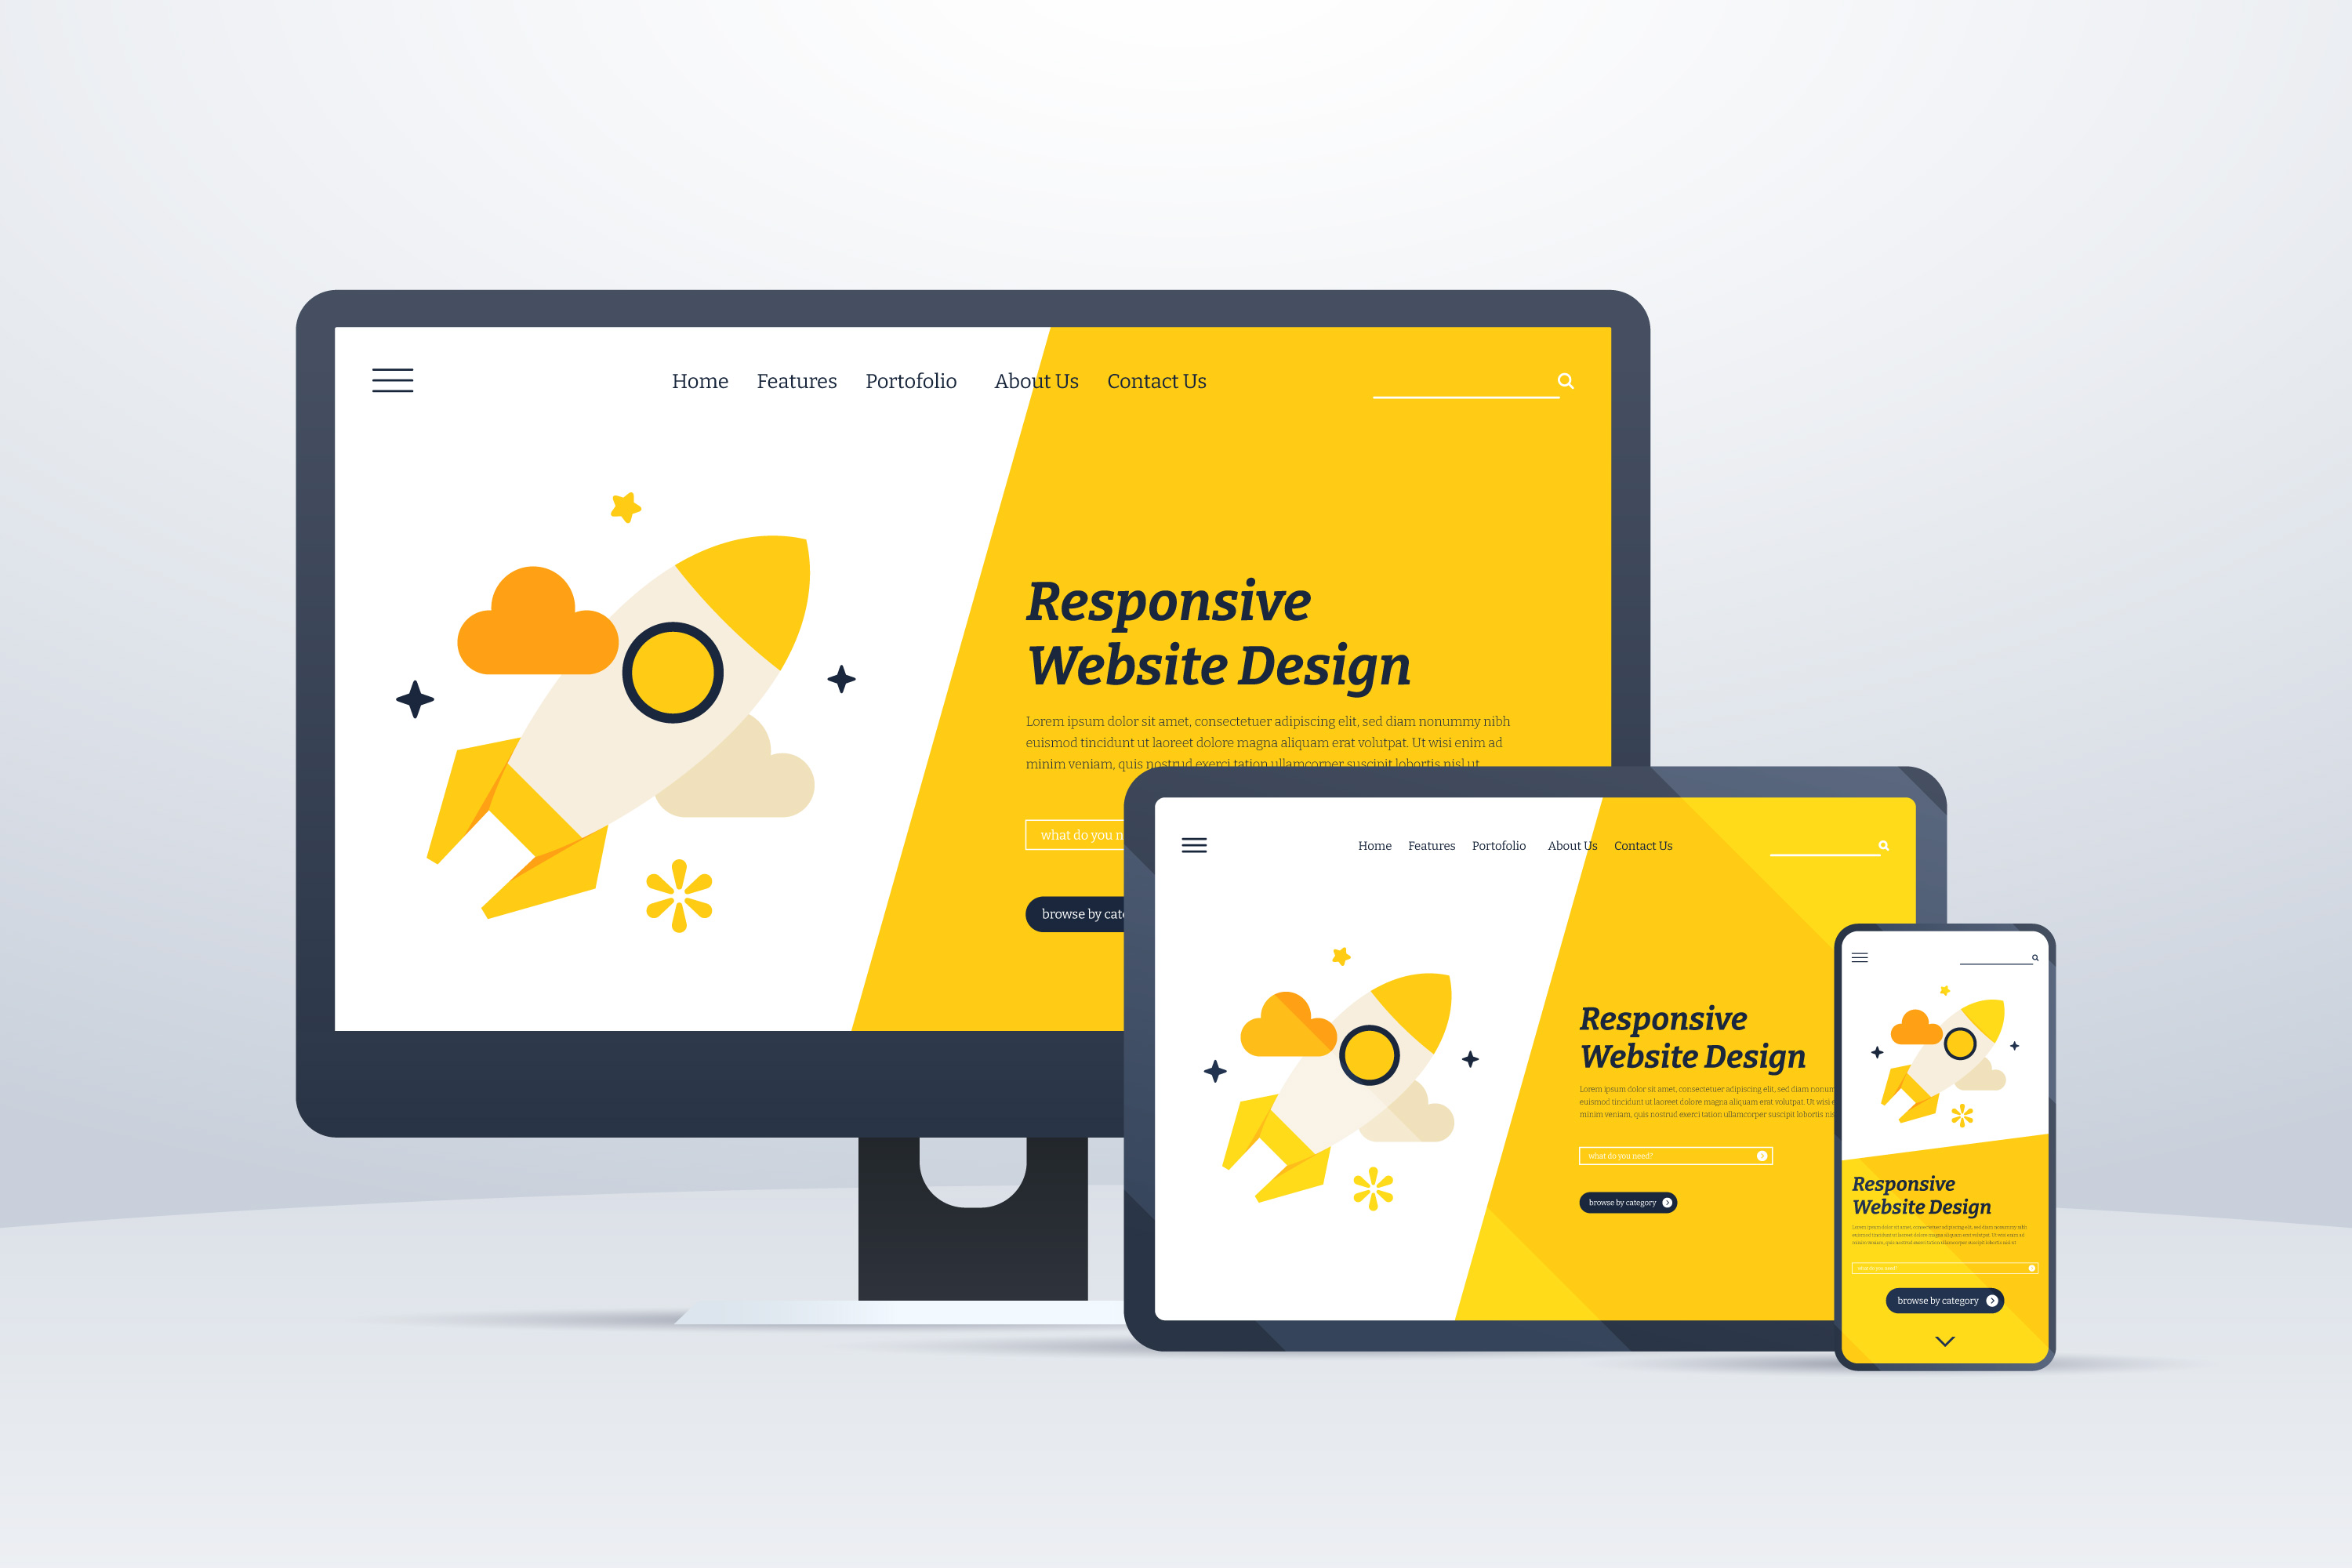 How does responsive web design impact website traffic?